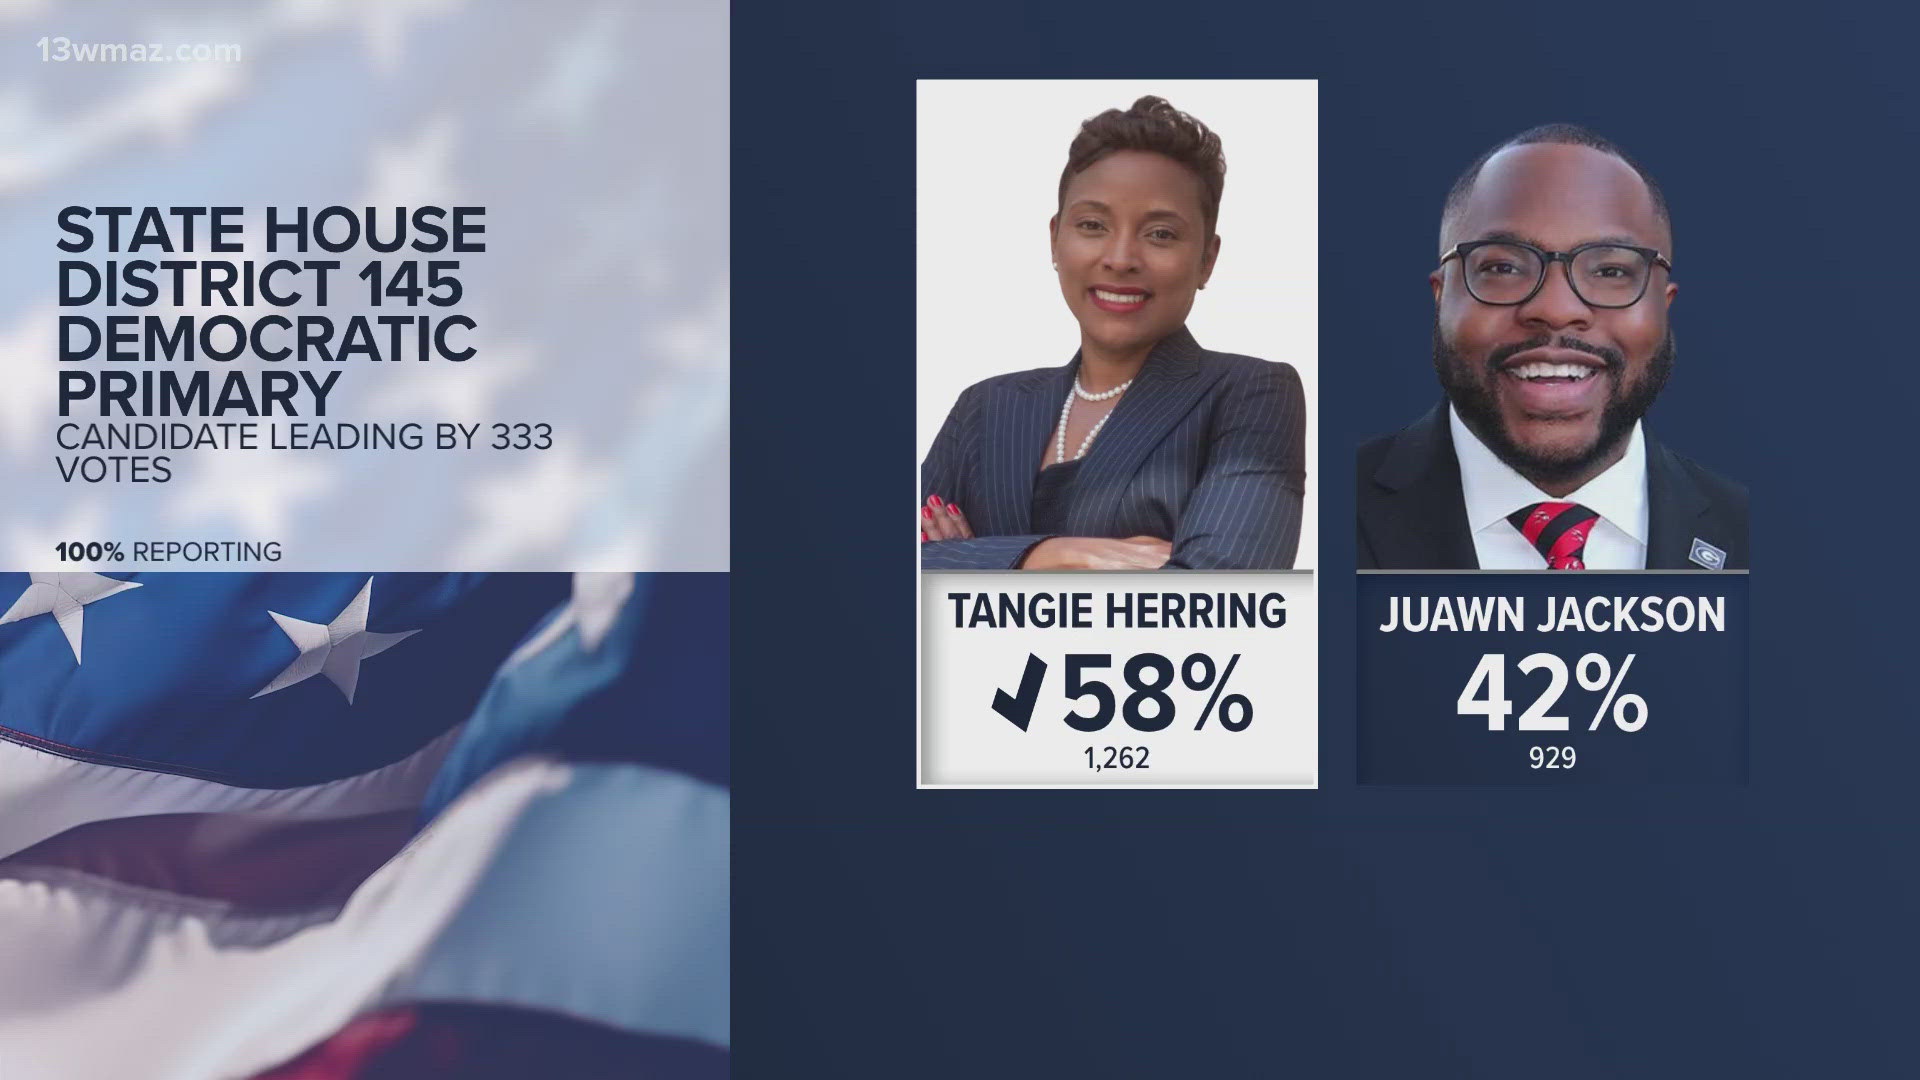 Juwan Jackson and Tangie Herring faced off for the Democratic nomination after the primary narrowed the field down to the two.